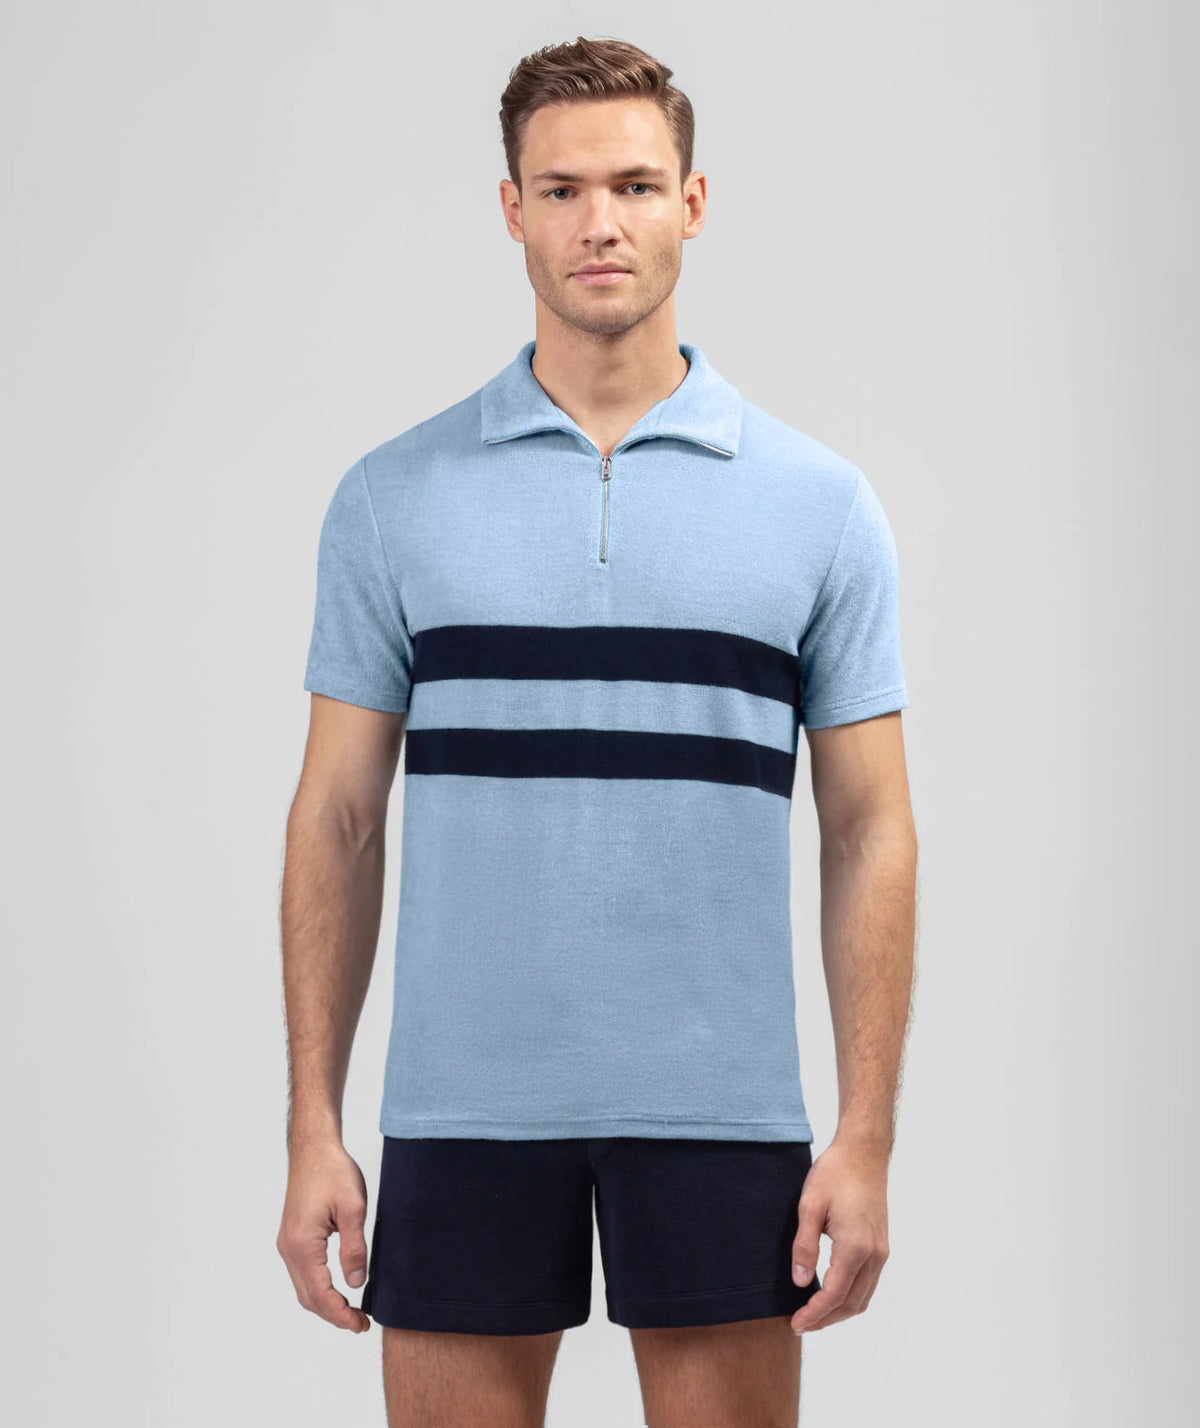 Terry Cotton RD Polo Stripes: Dusty Blue